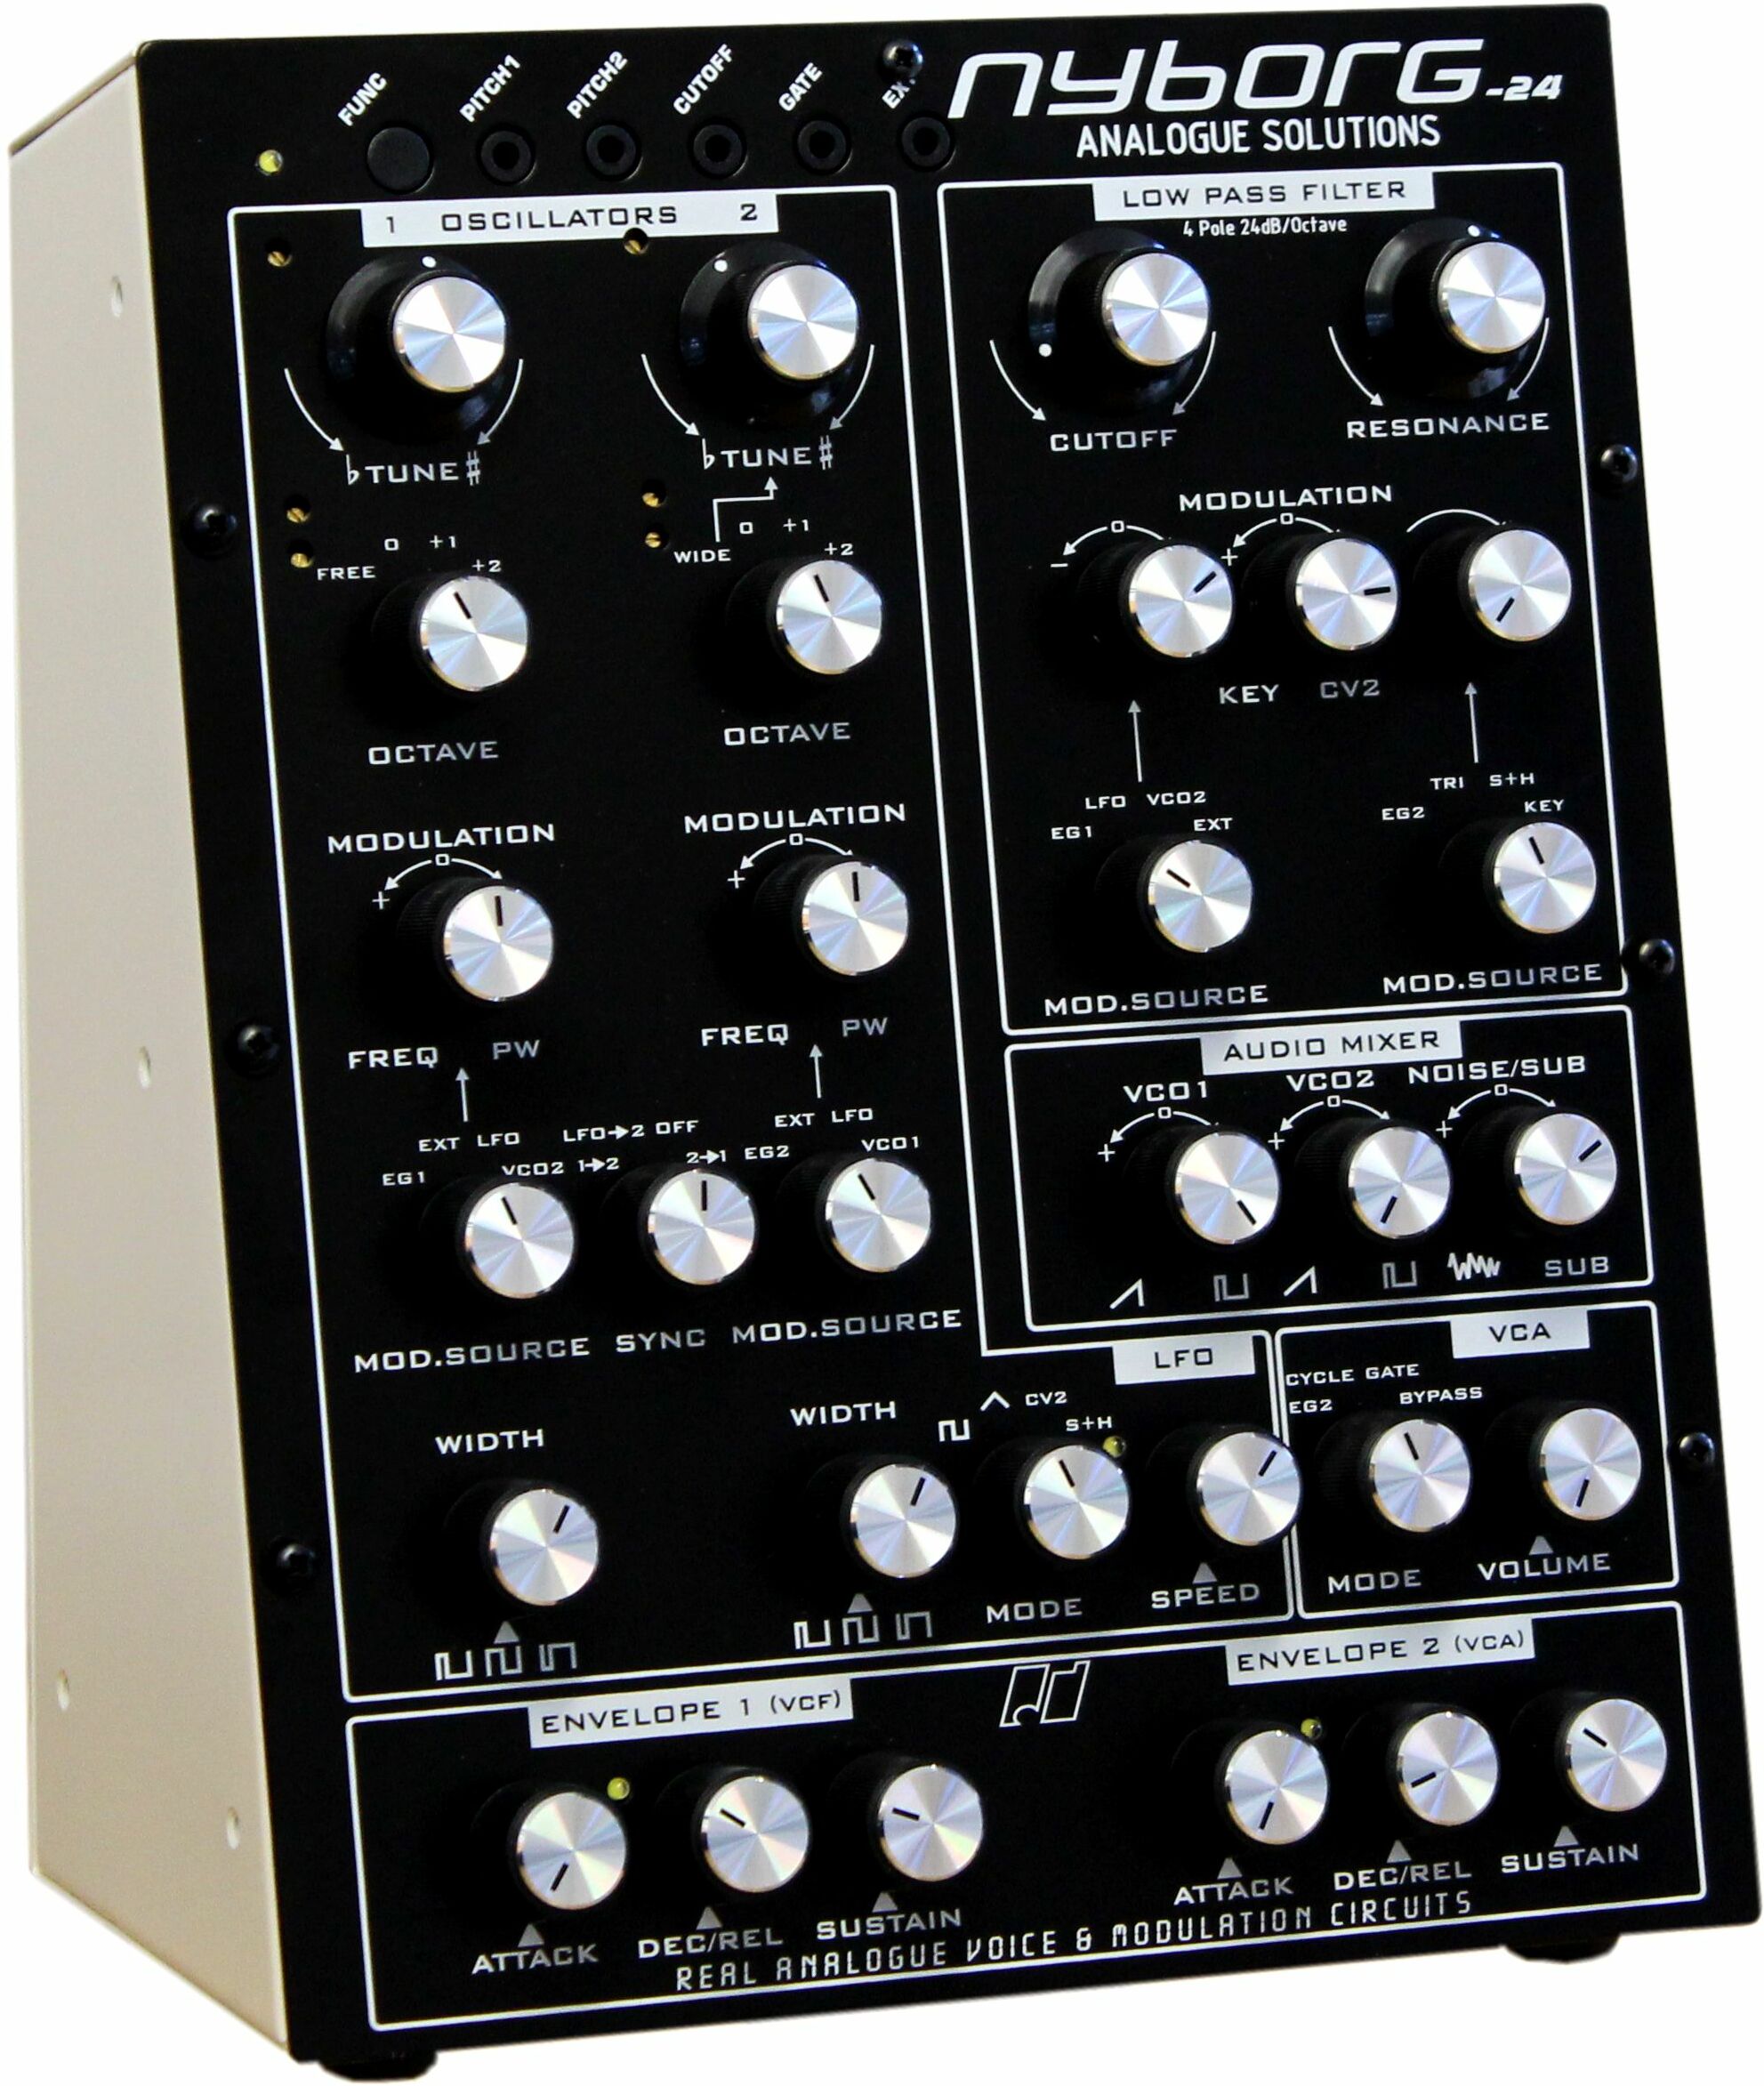 Analogue Solutions Nyborg-24 - Expander - Main picture